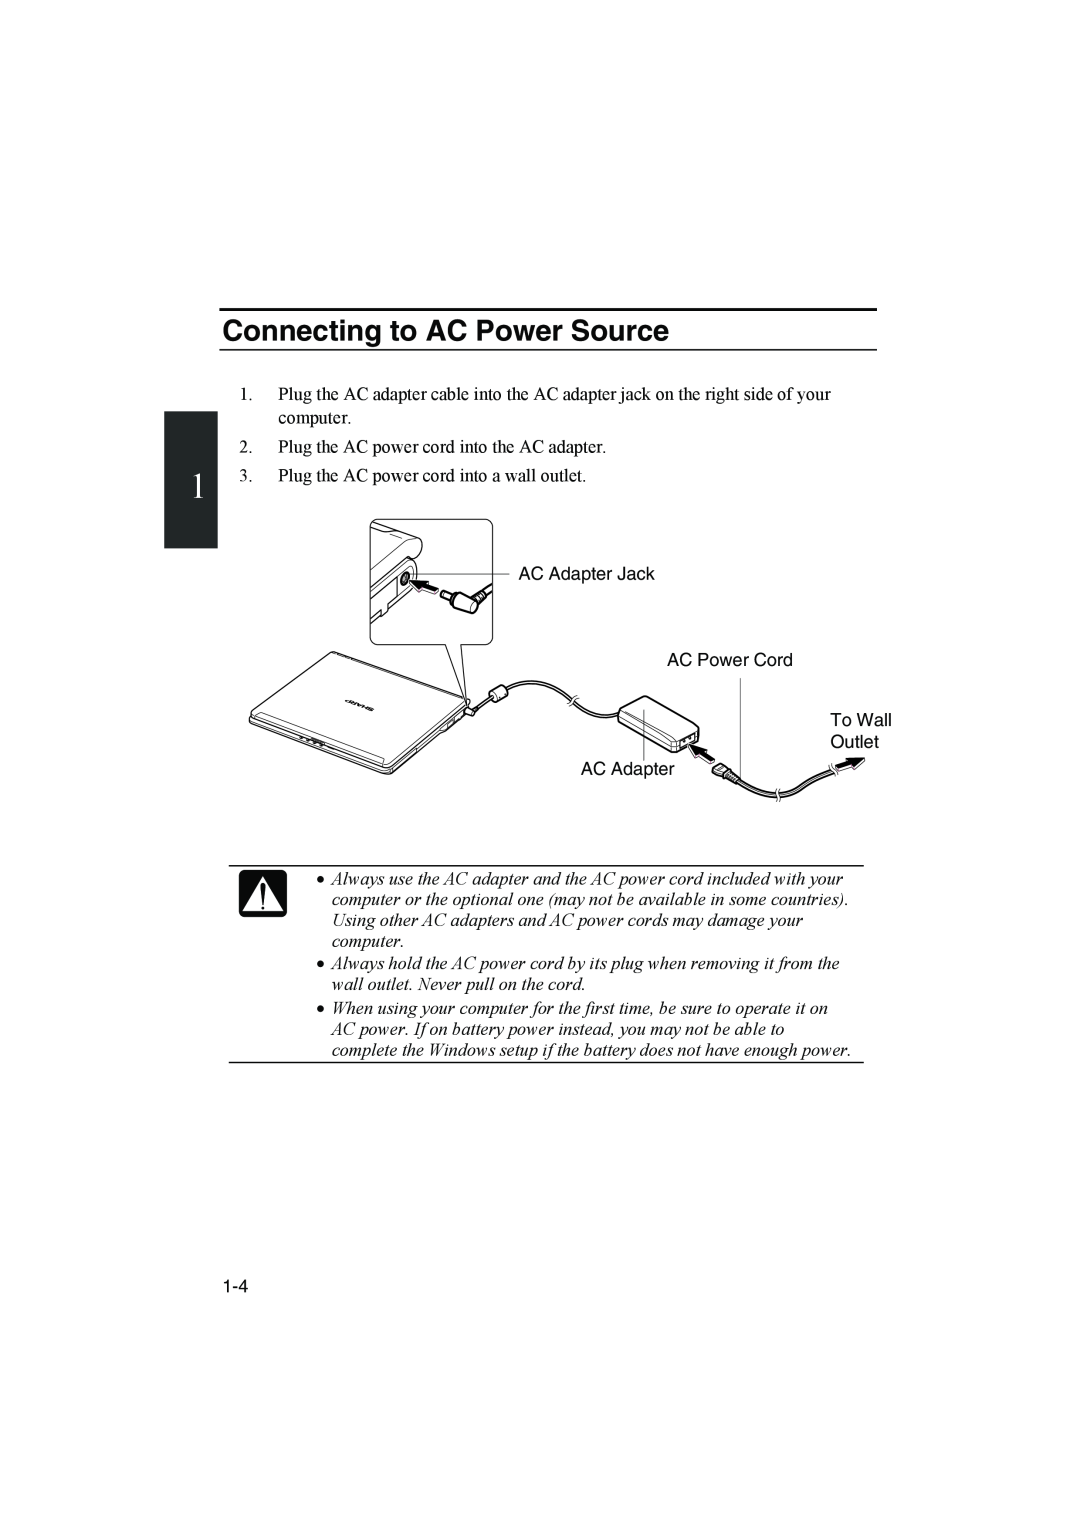 Sharp PC-MM1 manual Connecting to AC Power Source, computer, Plug the AC power cord into the AC adapter 